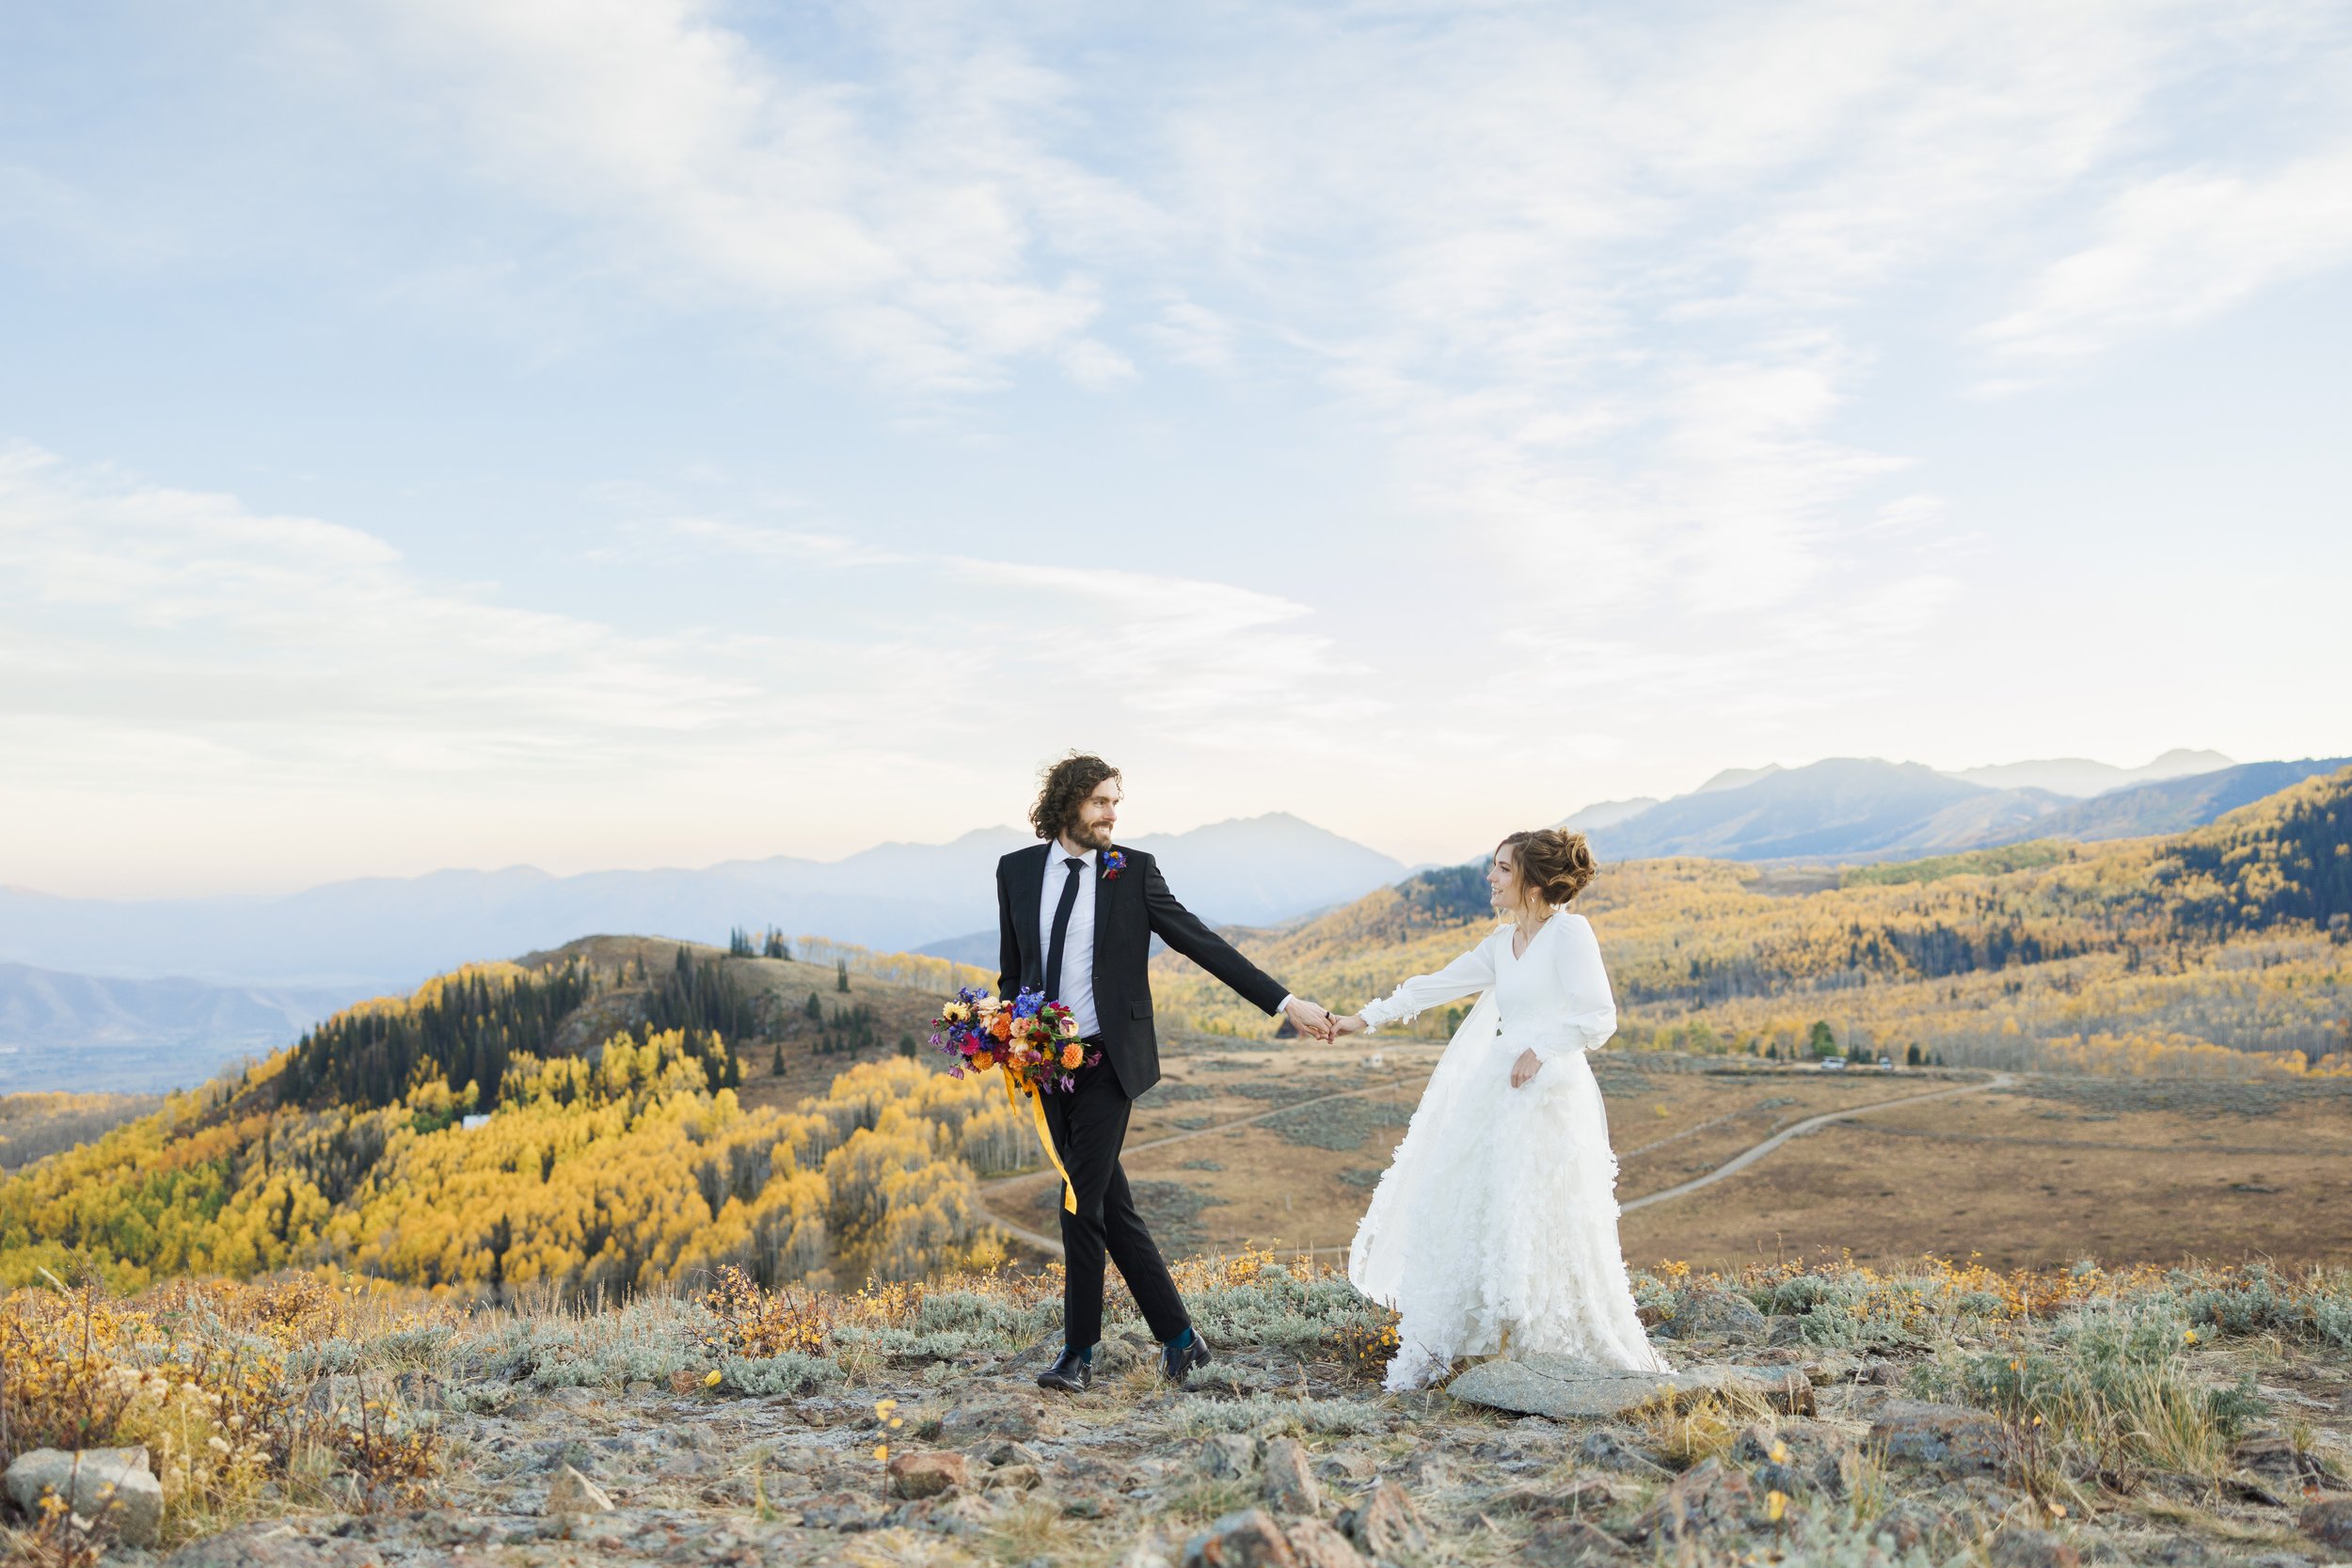  In the Cottonwood Canyon, the bride and groom walk along the mountain top with yellow trees behind them by Savanna Richardson Photography.  #SavannaRichardsonPhotography #SavannaRichardsonFormals #CottonwoodCanyon #WeddingFormals #SLCWedding #fallwe